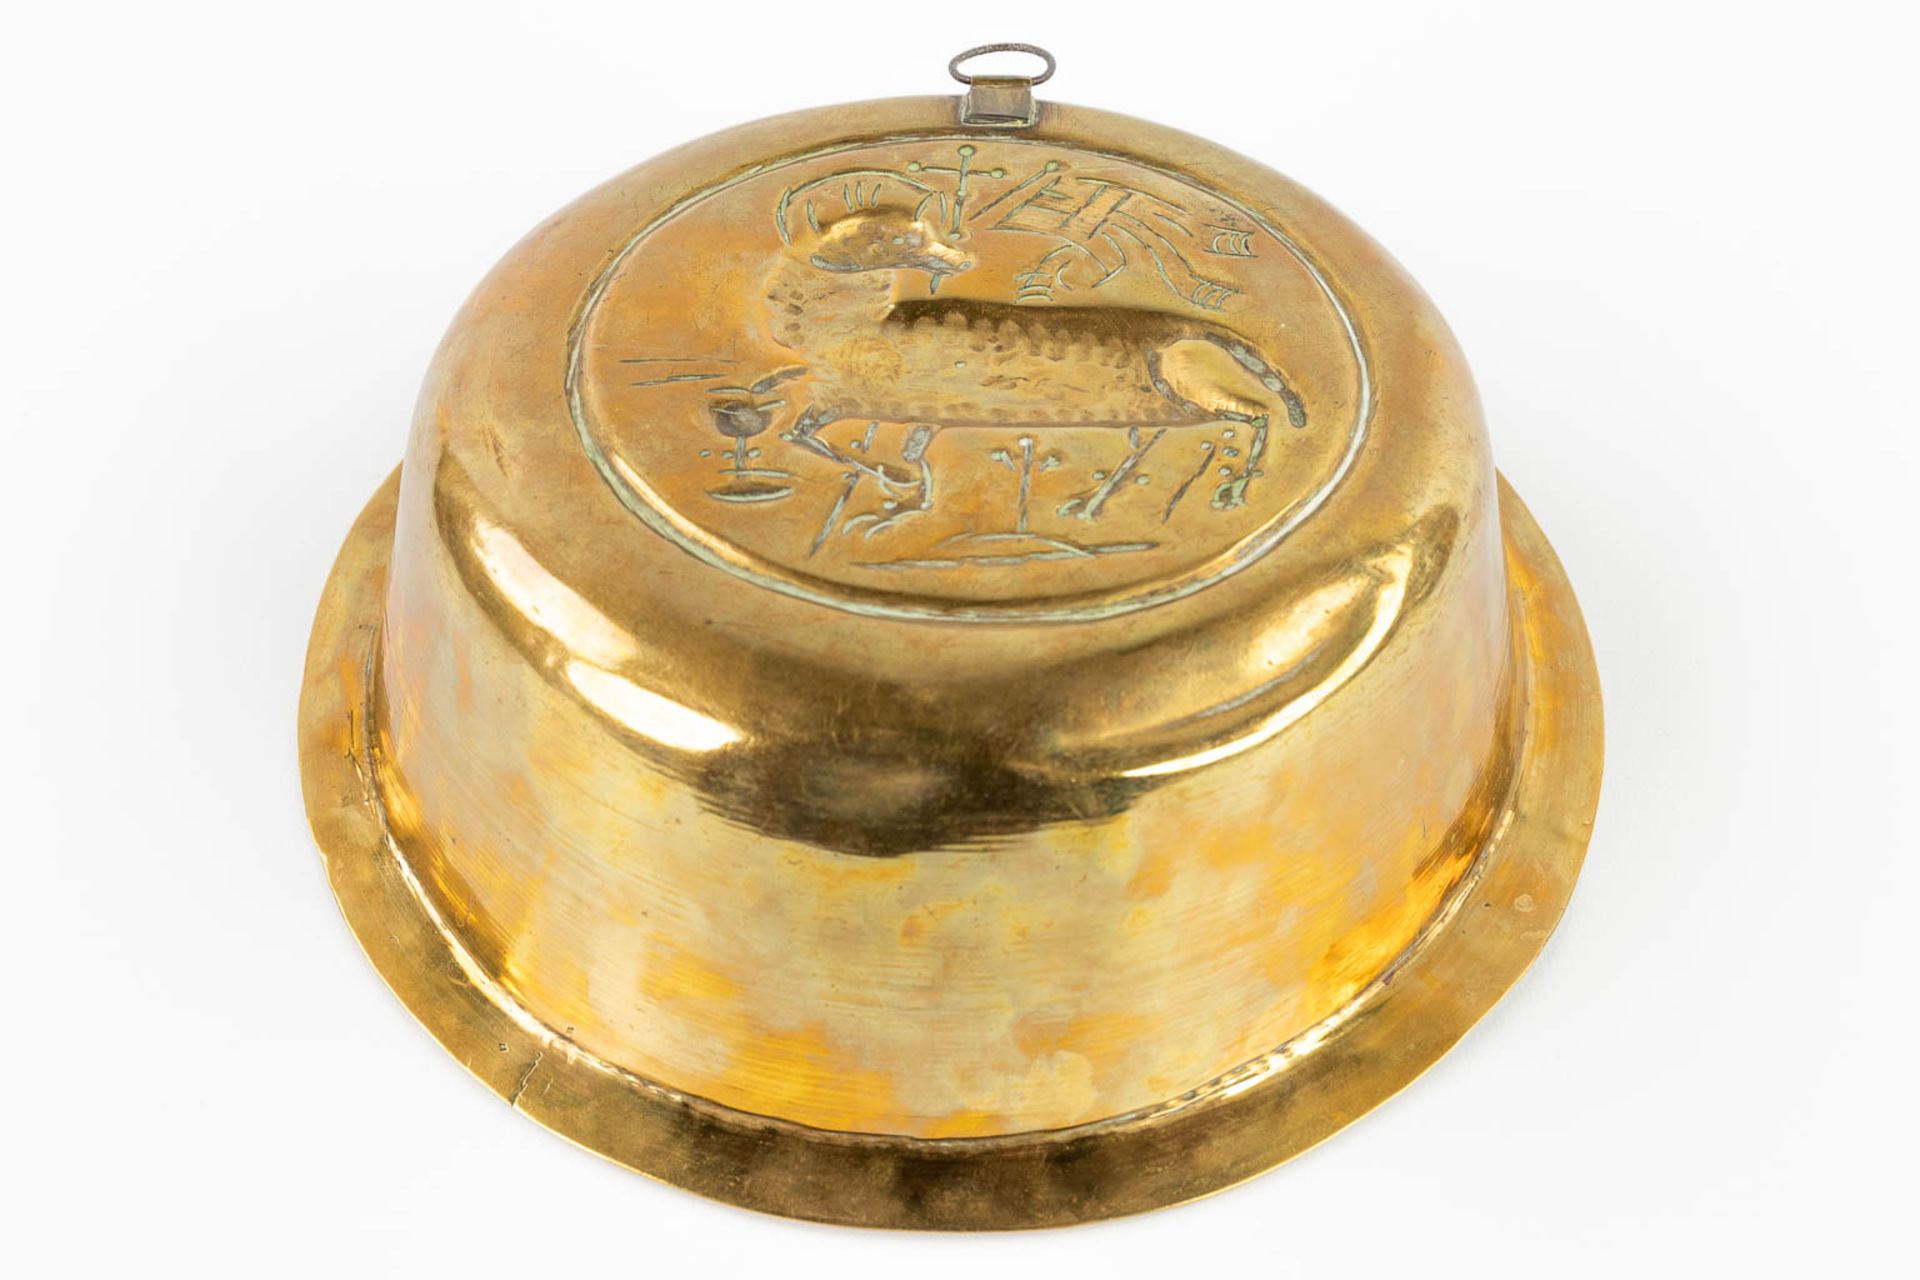 An antique Baptismal Font, copper embossed with an image of the Holy Lamb. 17th C. (H:7,5 x D:26 cm) - Image 8 of 9